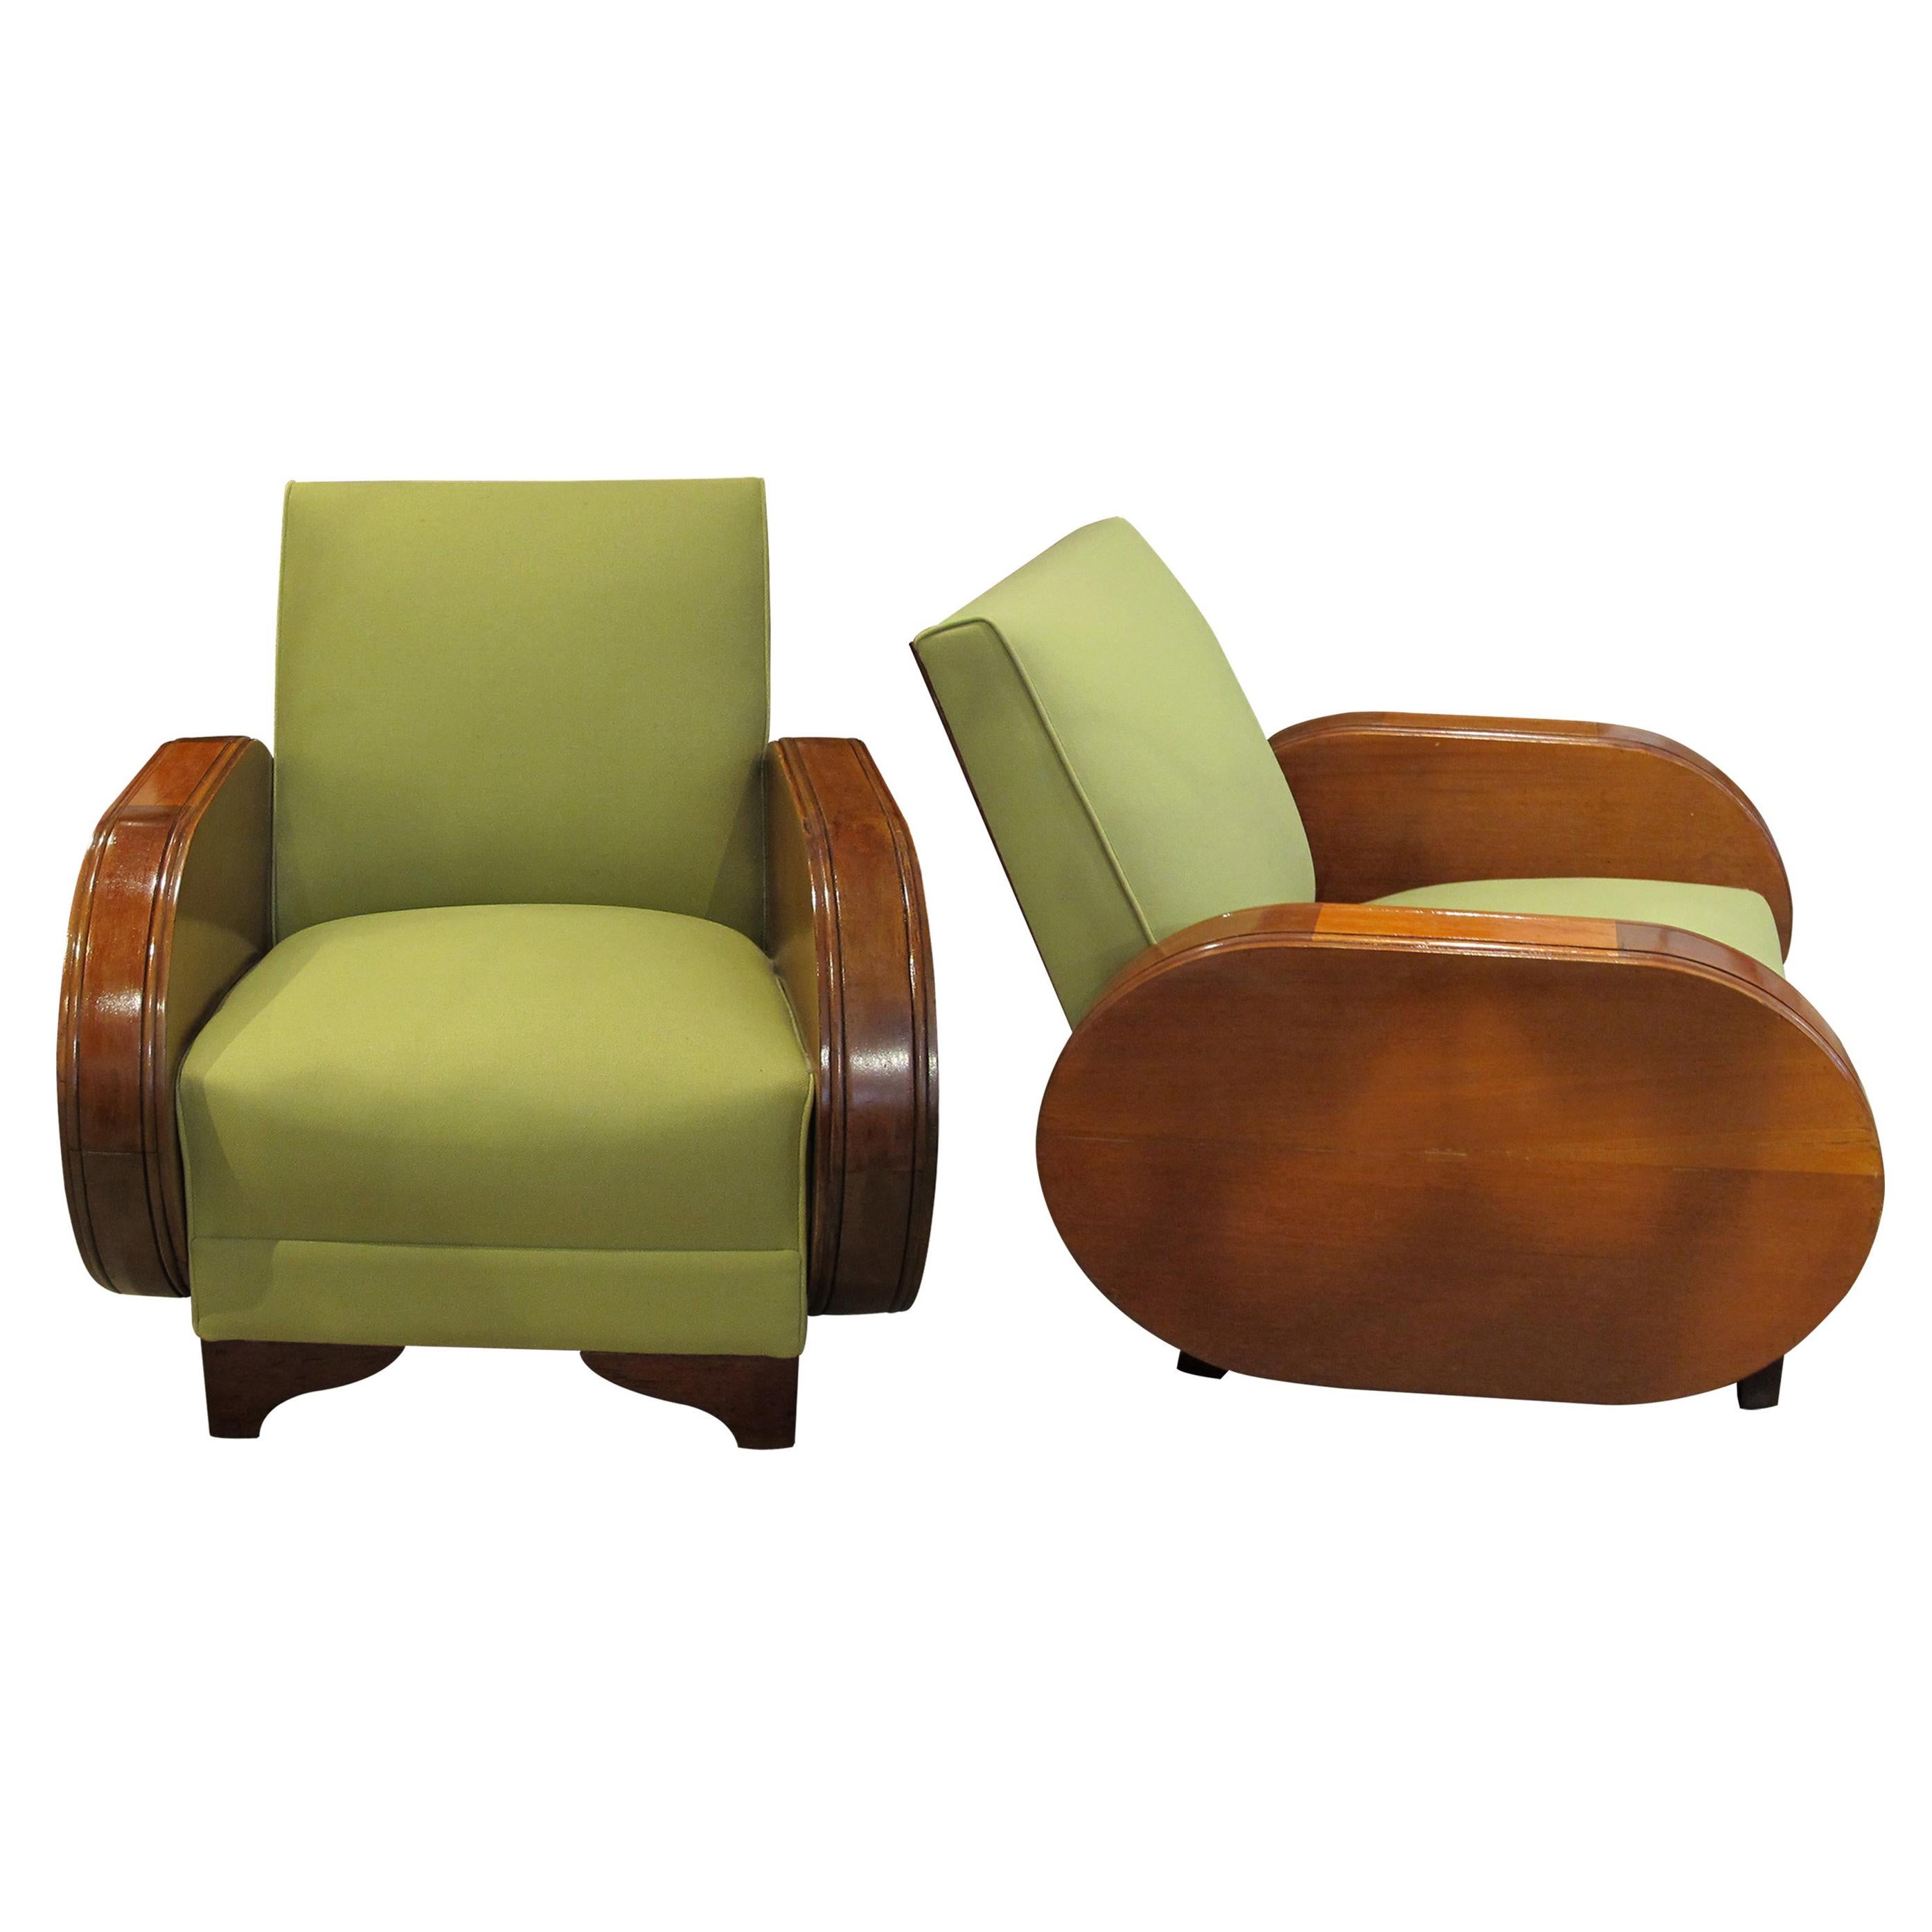 Pair of 1930s Northern European Walnut Art Deco Armchairs in Green Fabric